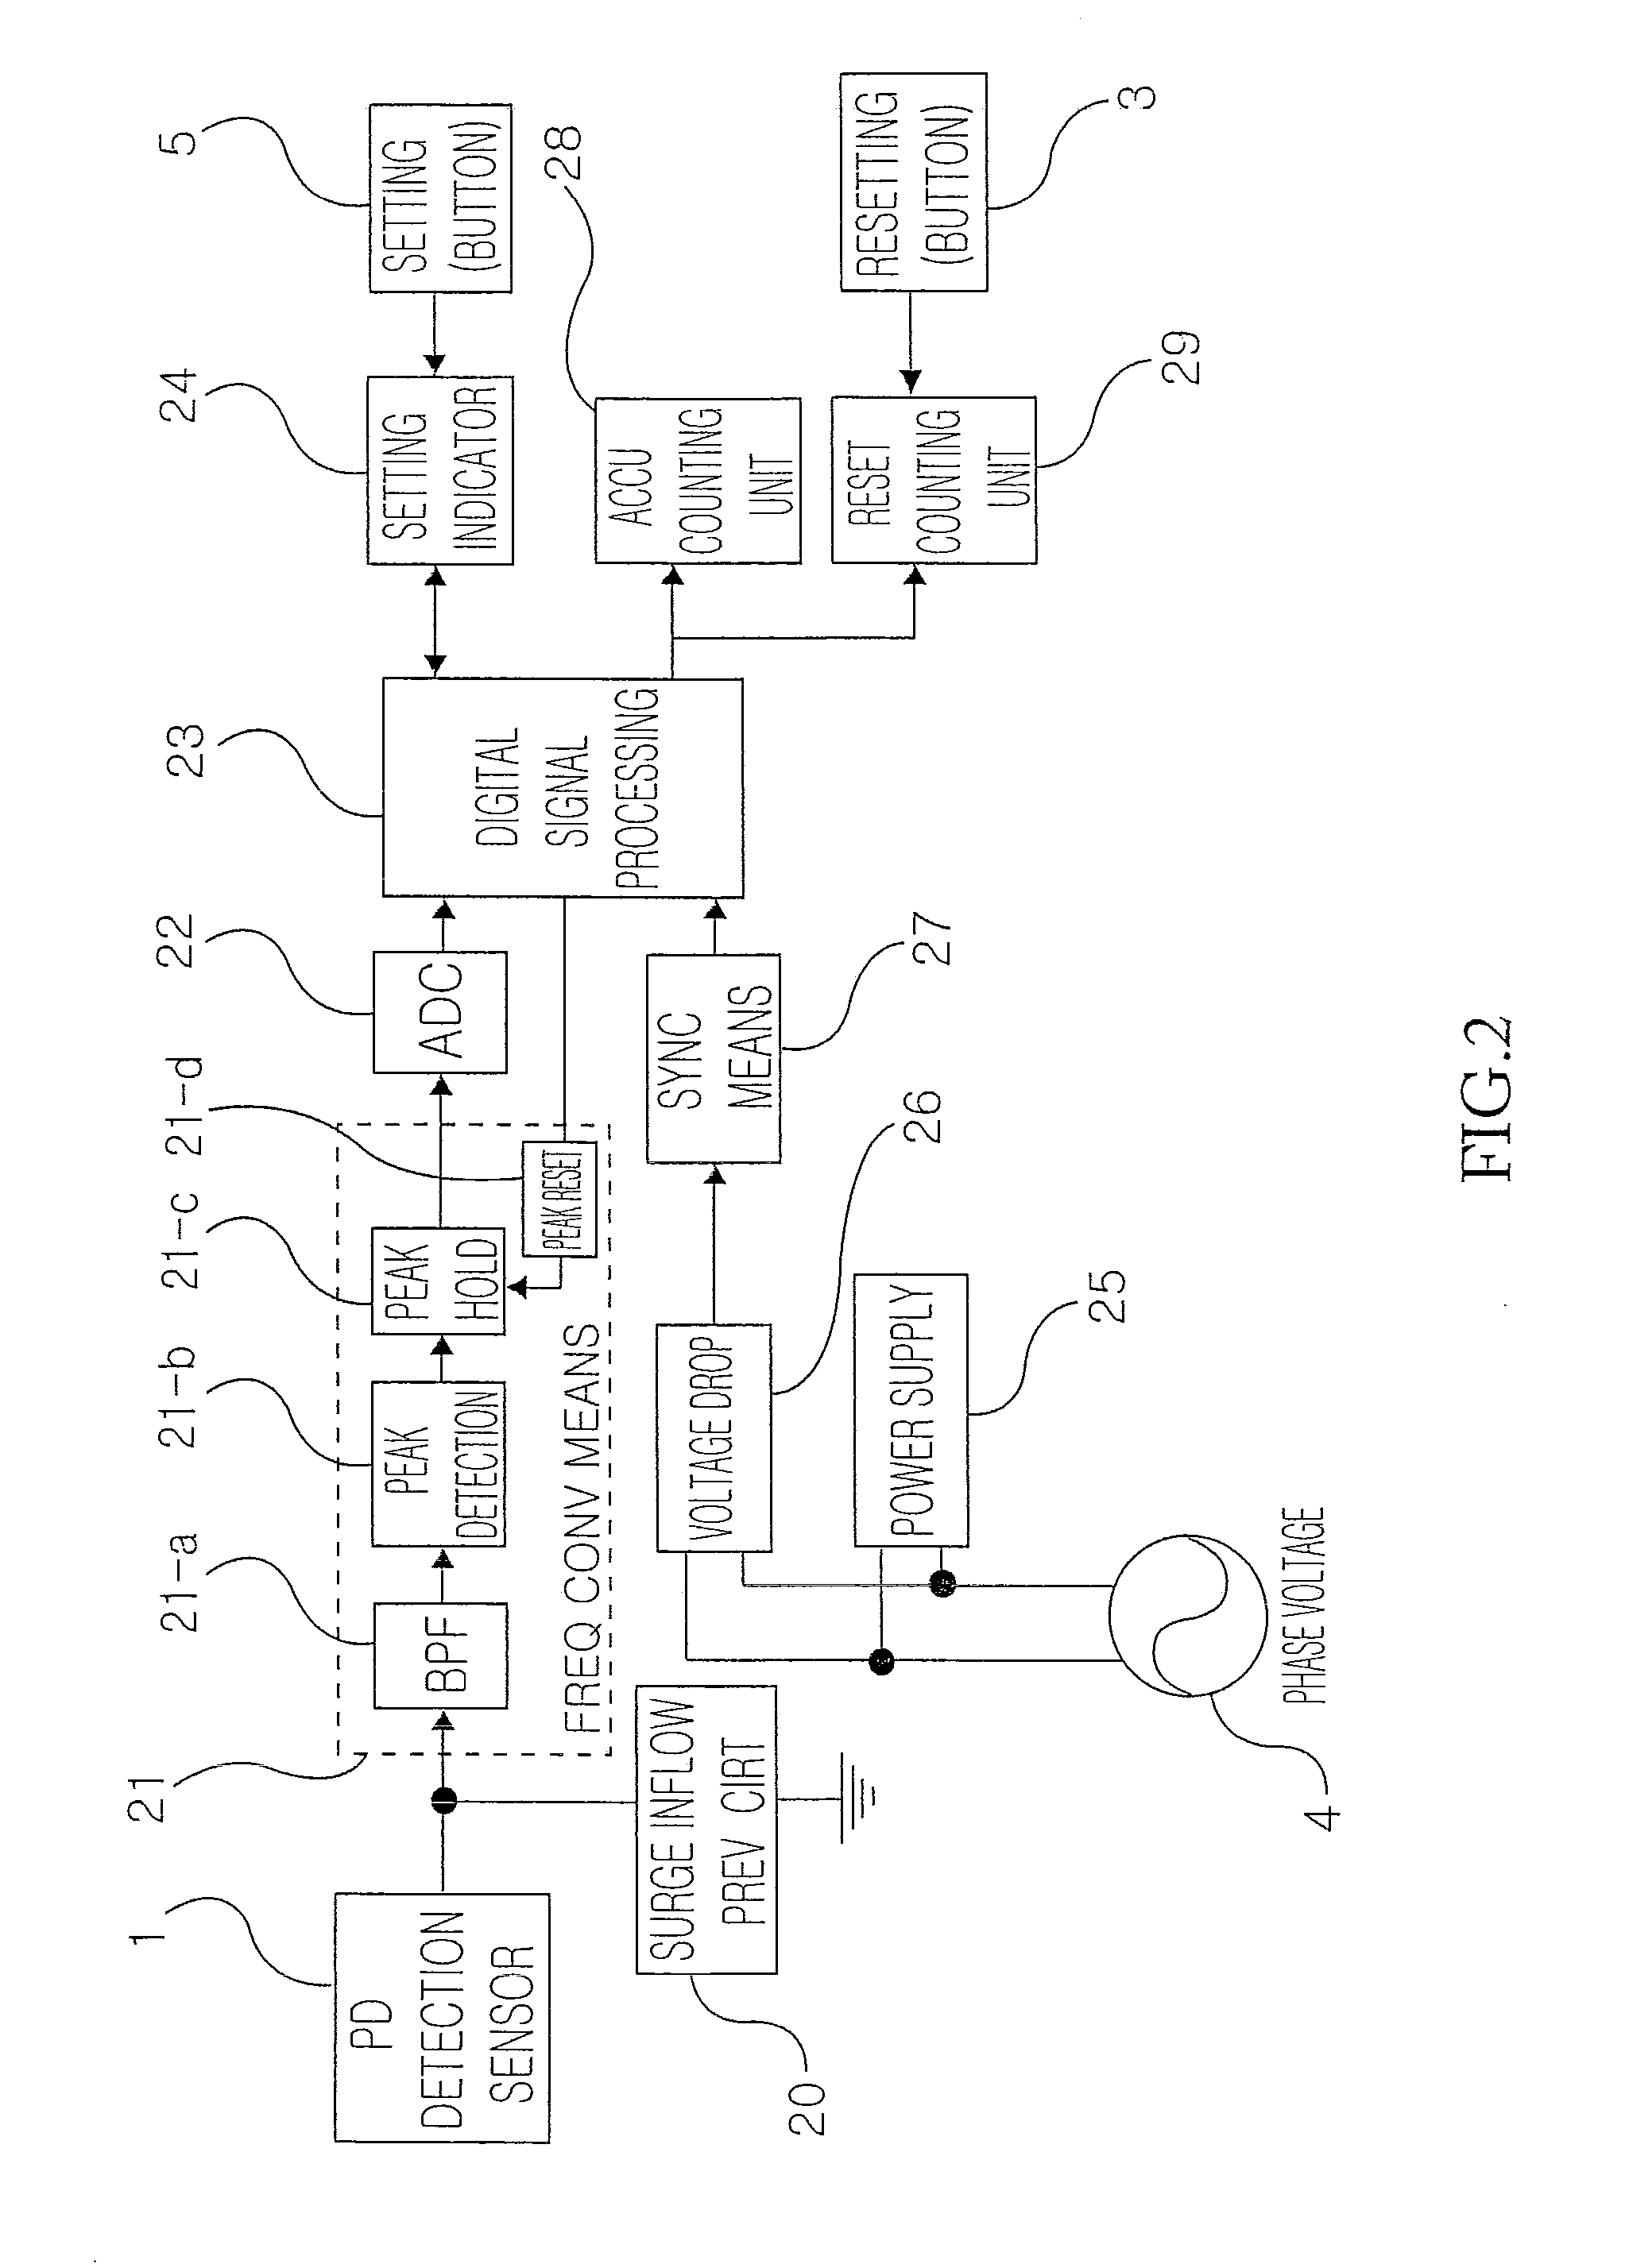 Partial discharge counter for diagnosis of gas insulated switchgear